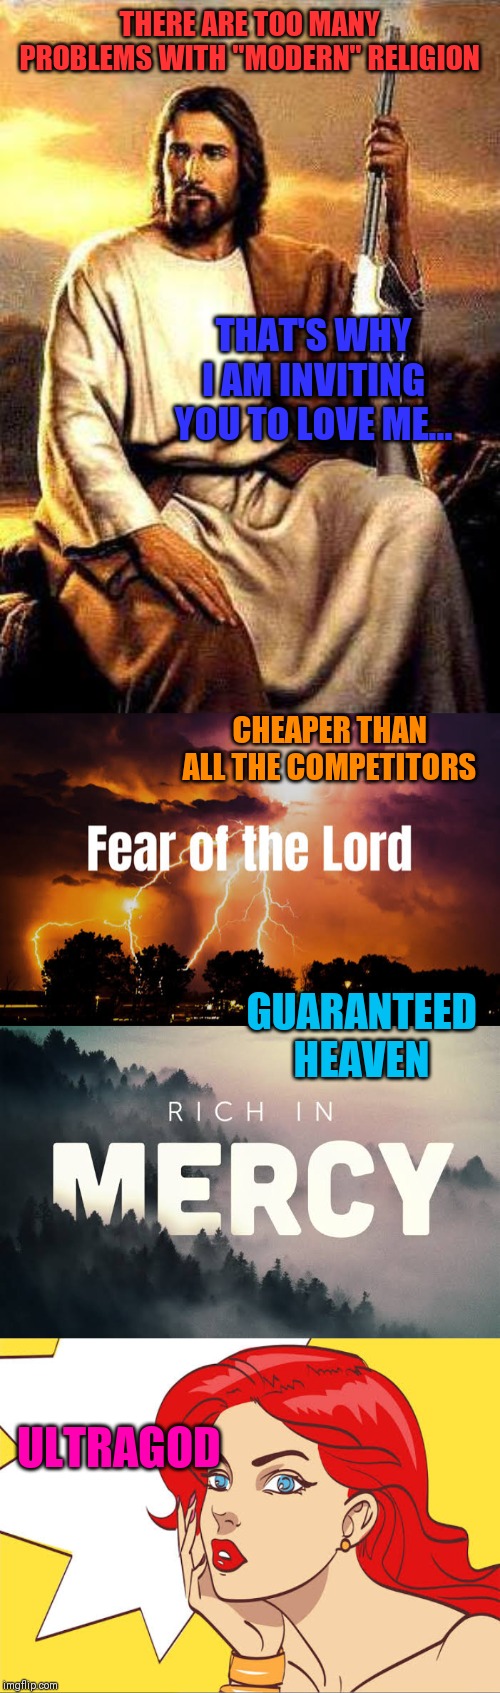 No more false gods | THERE ARE TOO MANY PROBLEMS WITH "MODERN" RELIGION; THAT'S WHY I AM INVITING YOU TO LOVE ME... CHEAPER THAN ALL THE COMPETITORS; GUARANTEED HEAVEN; ULTRAGOD | image tagged in religion,anti-religion,you underestimate my power,love wins,ultra instinct,it's true all of it han solo | made w/ Imgflip meme maker